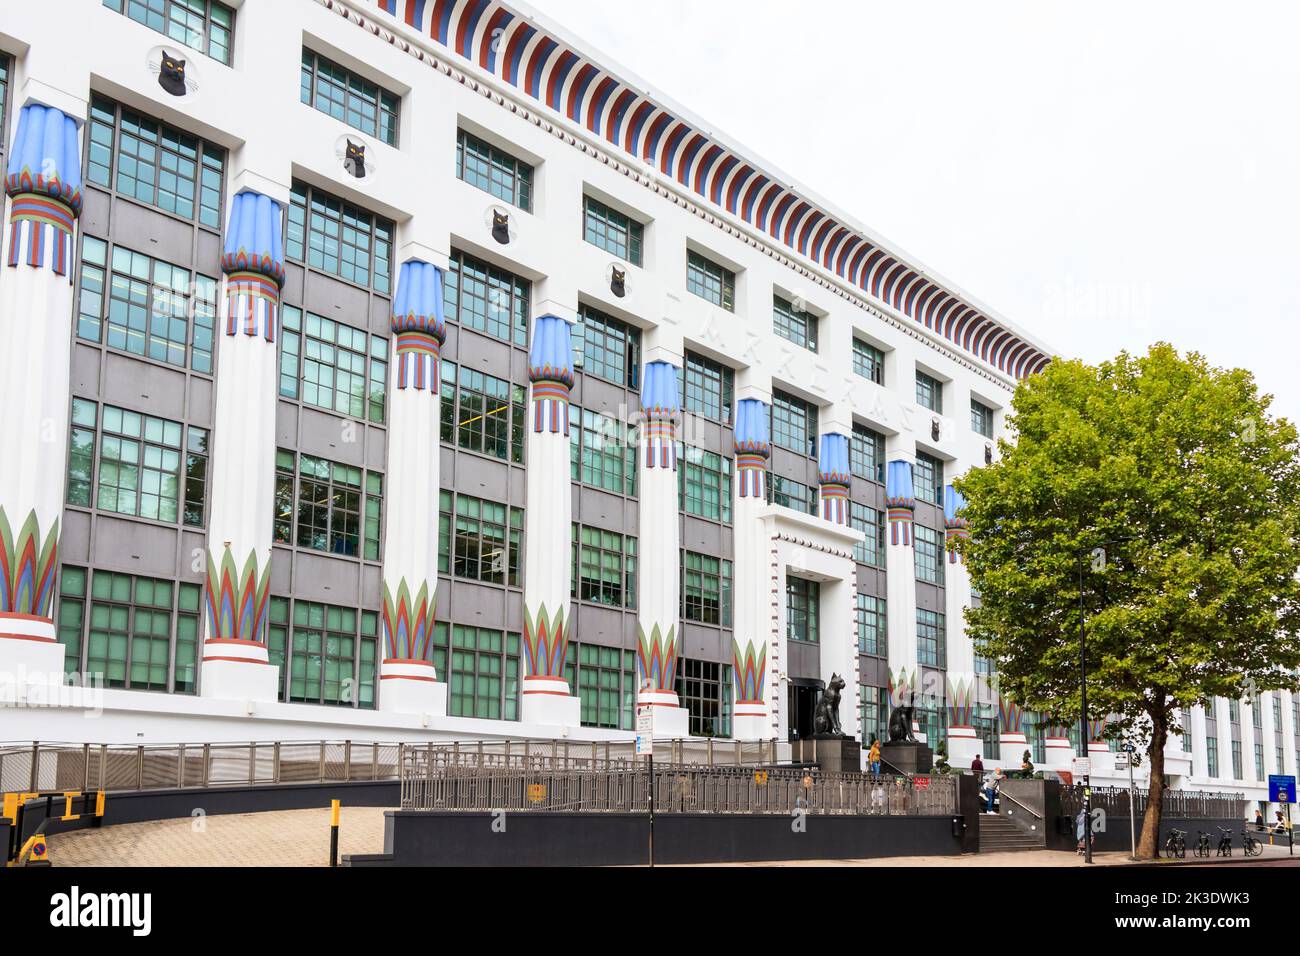 Black cats on guard at Greater London House, a large Art Deco building in Camden, London, UK. It is an example of early 20th Century Egyptian Revival Stock Photo